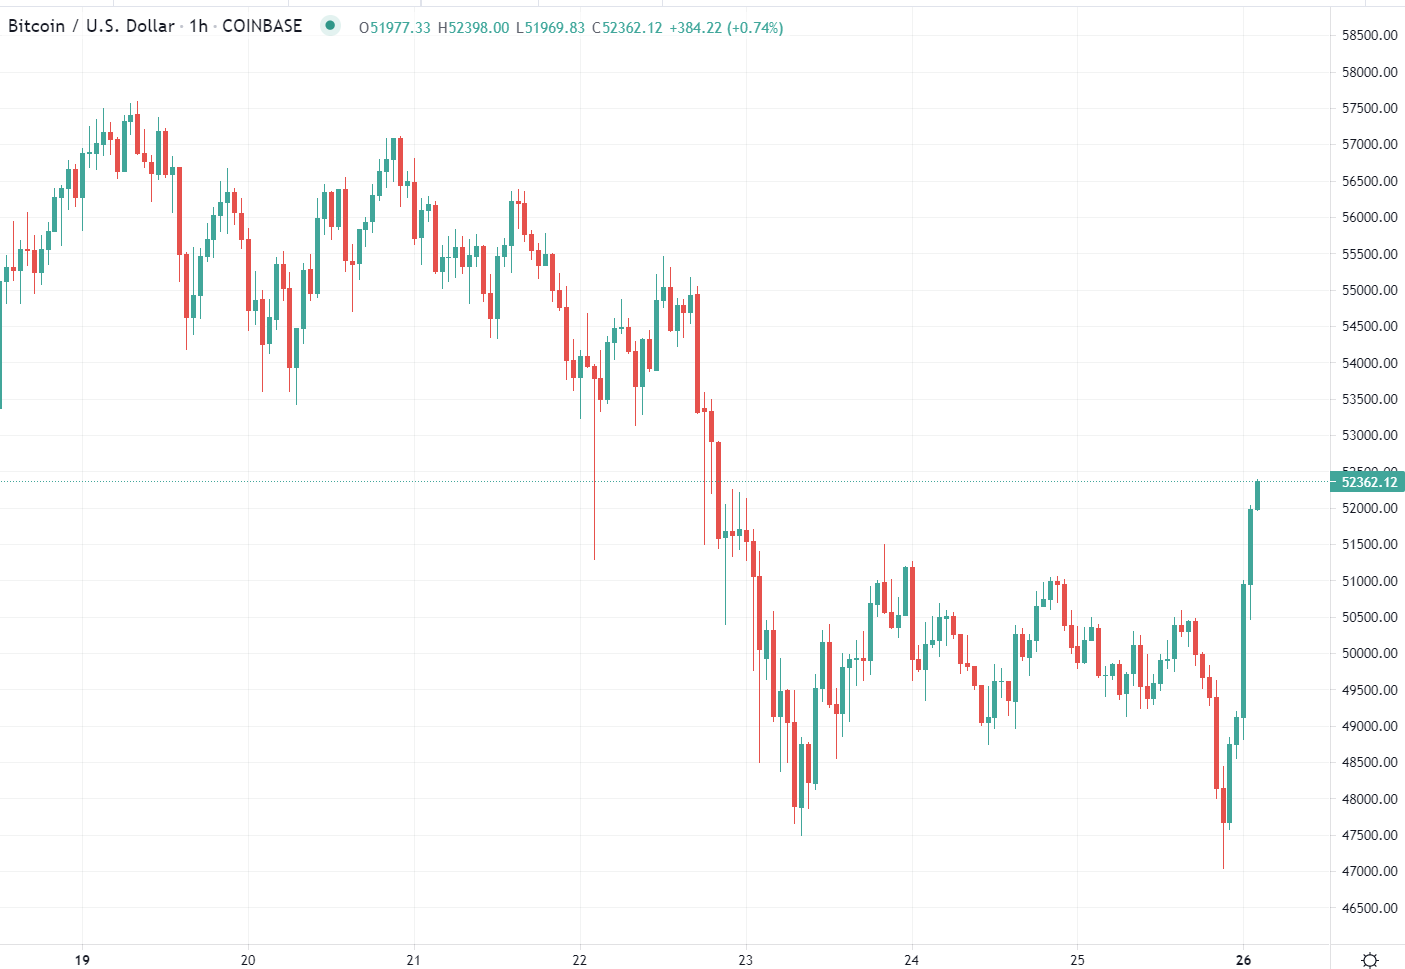 BTC had a slide in the early hours of Asia: Renewed slump for Bitcoin, drops under $48.5K